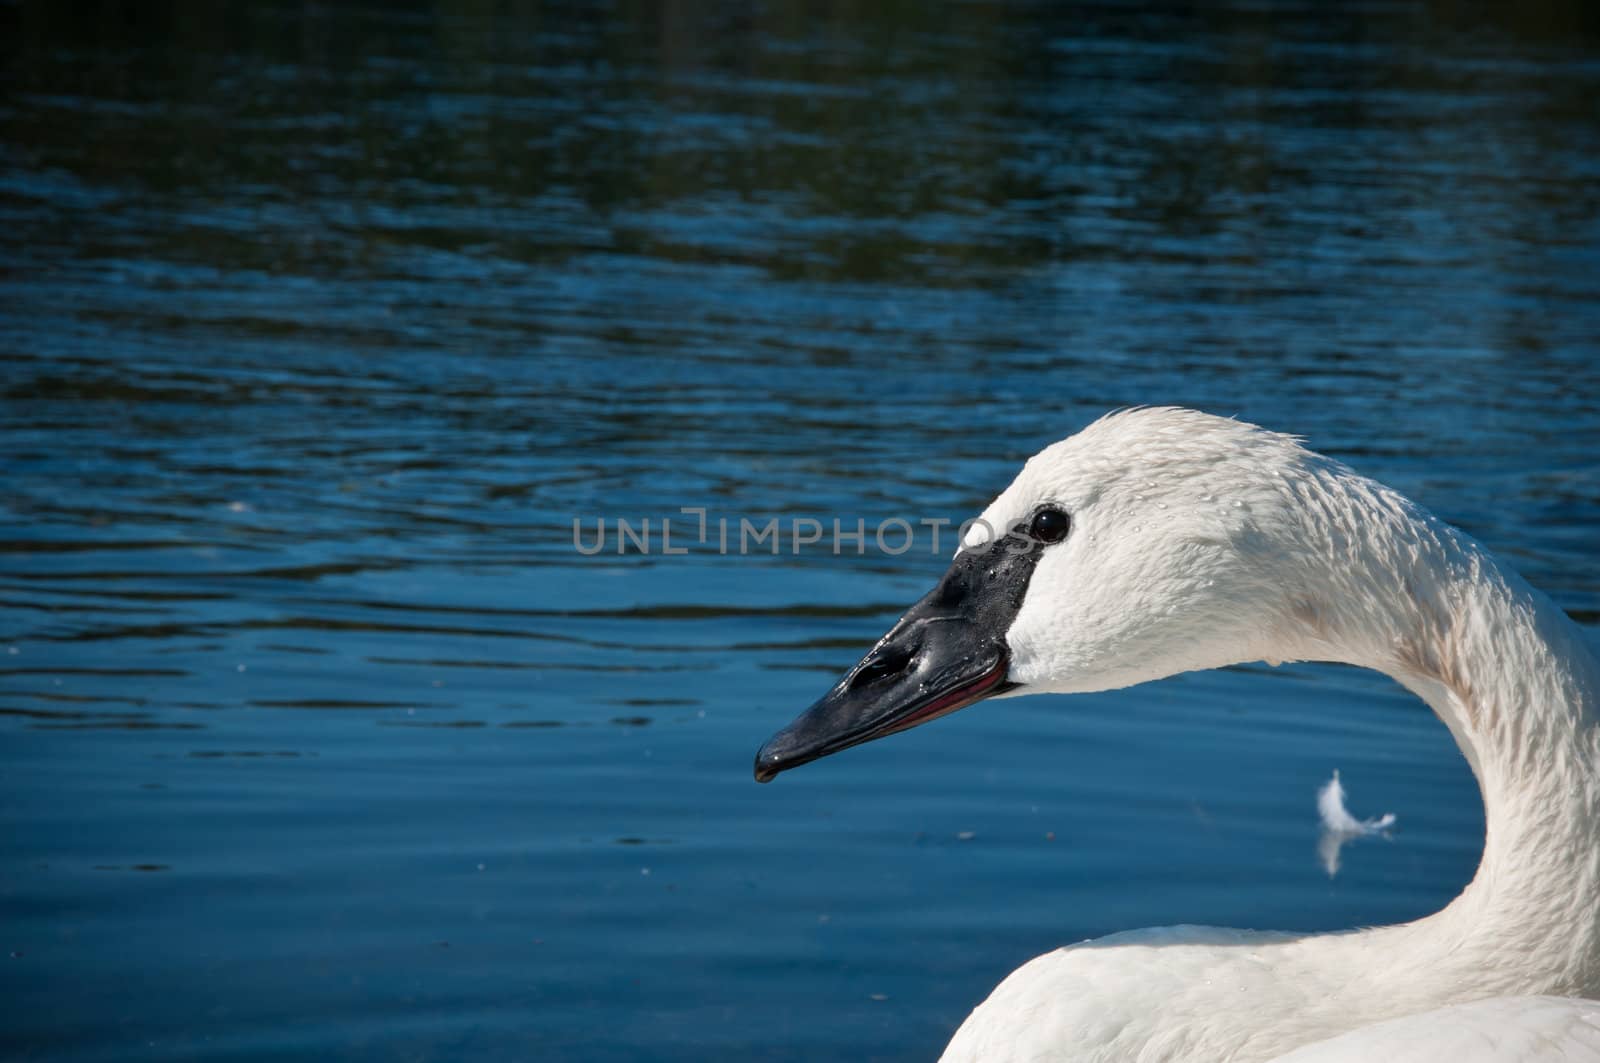 Close-up of a white mute swan swimming with a dark blue background created by the water fading off into the distance. Water droplets are visible on the birds' plumage. Possible concept for wildlife, beauty, elegance, grace, outdoors